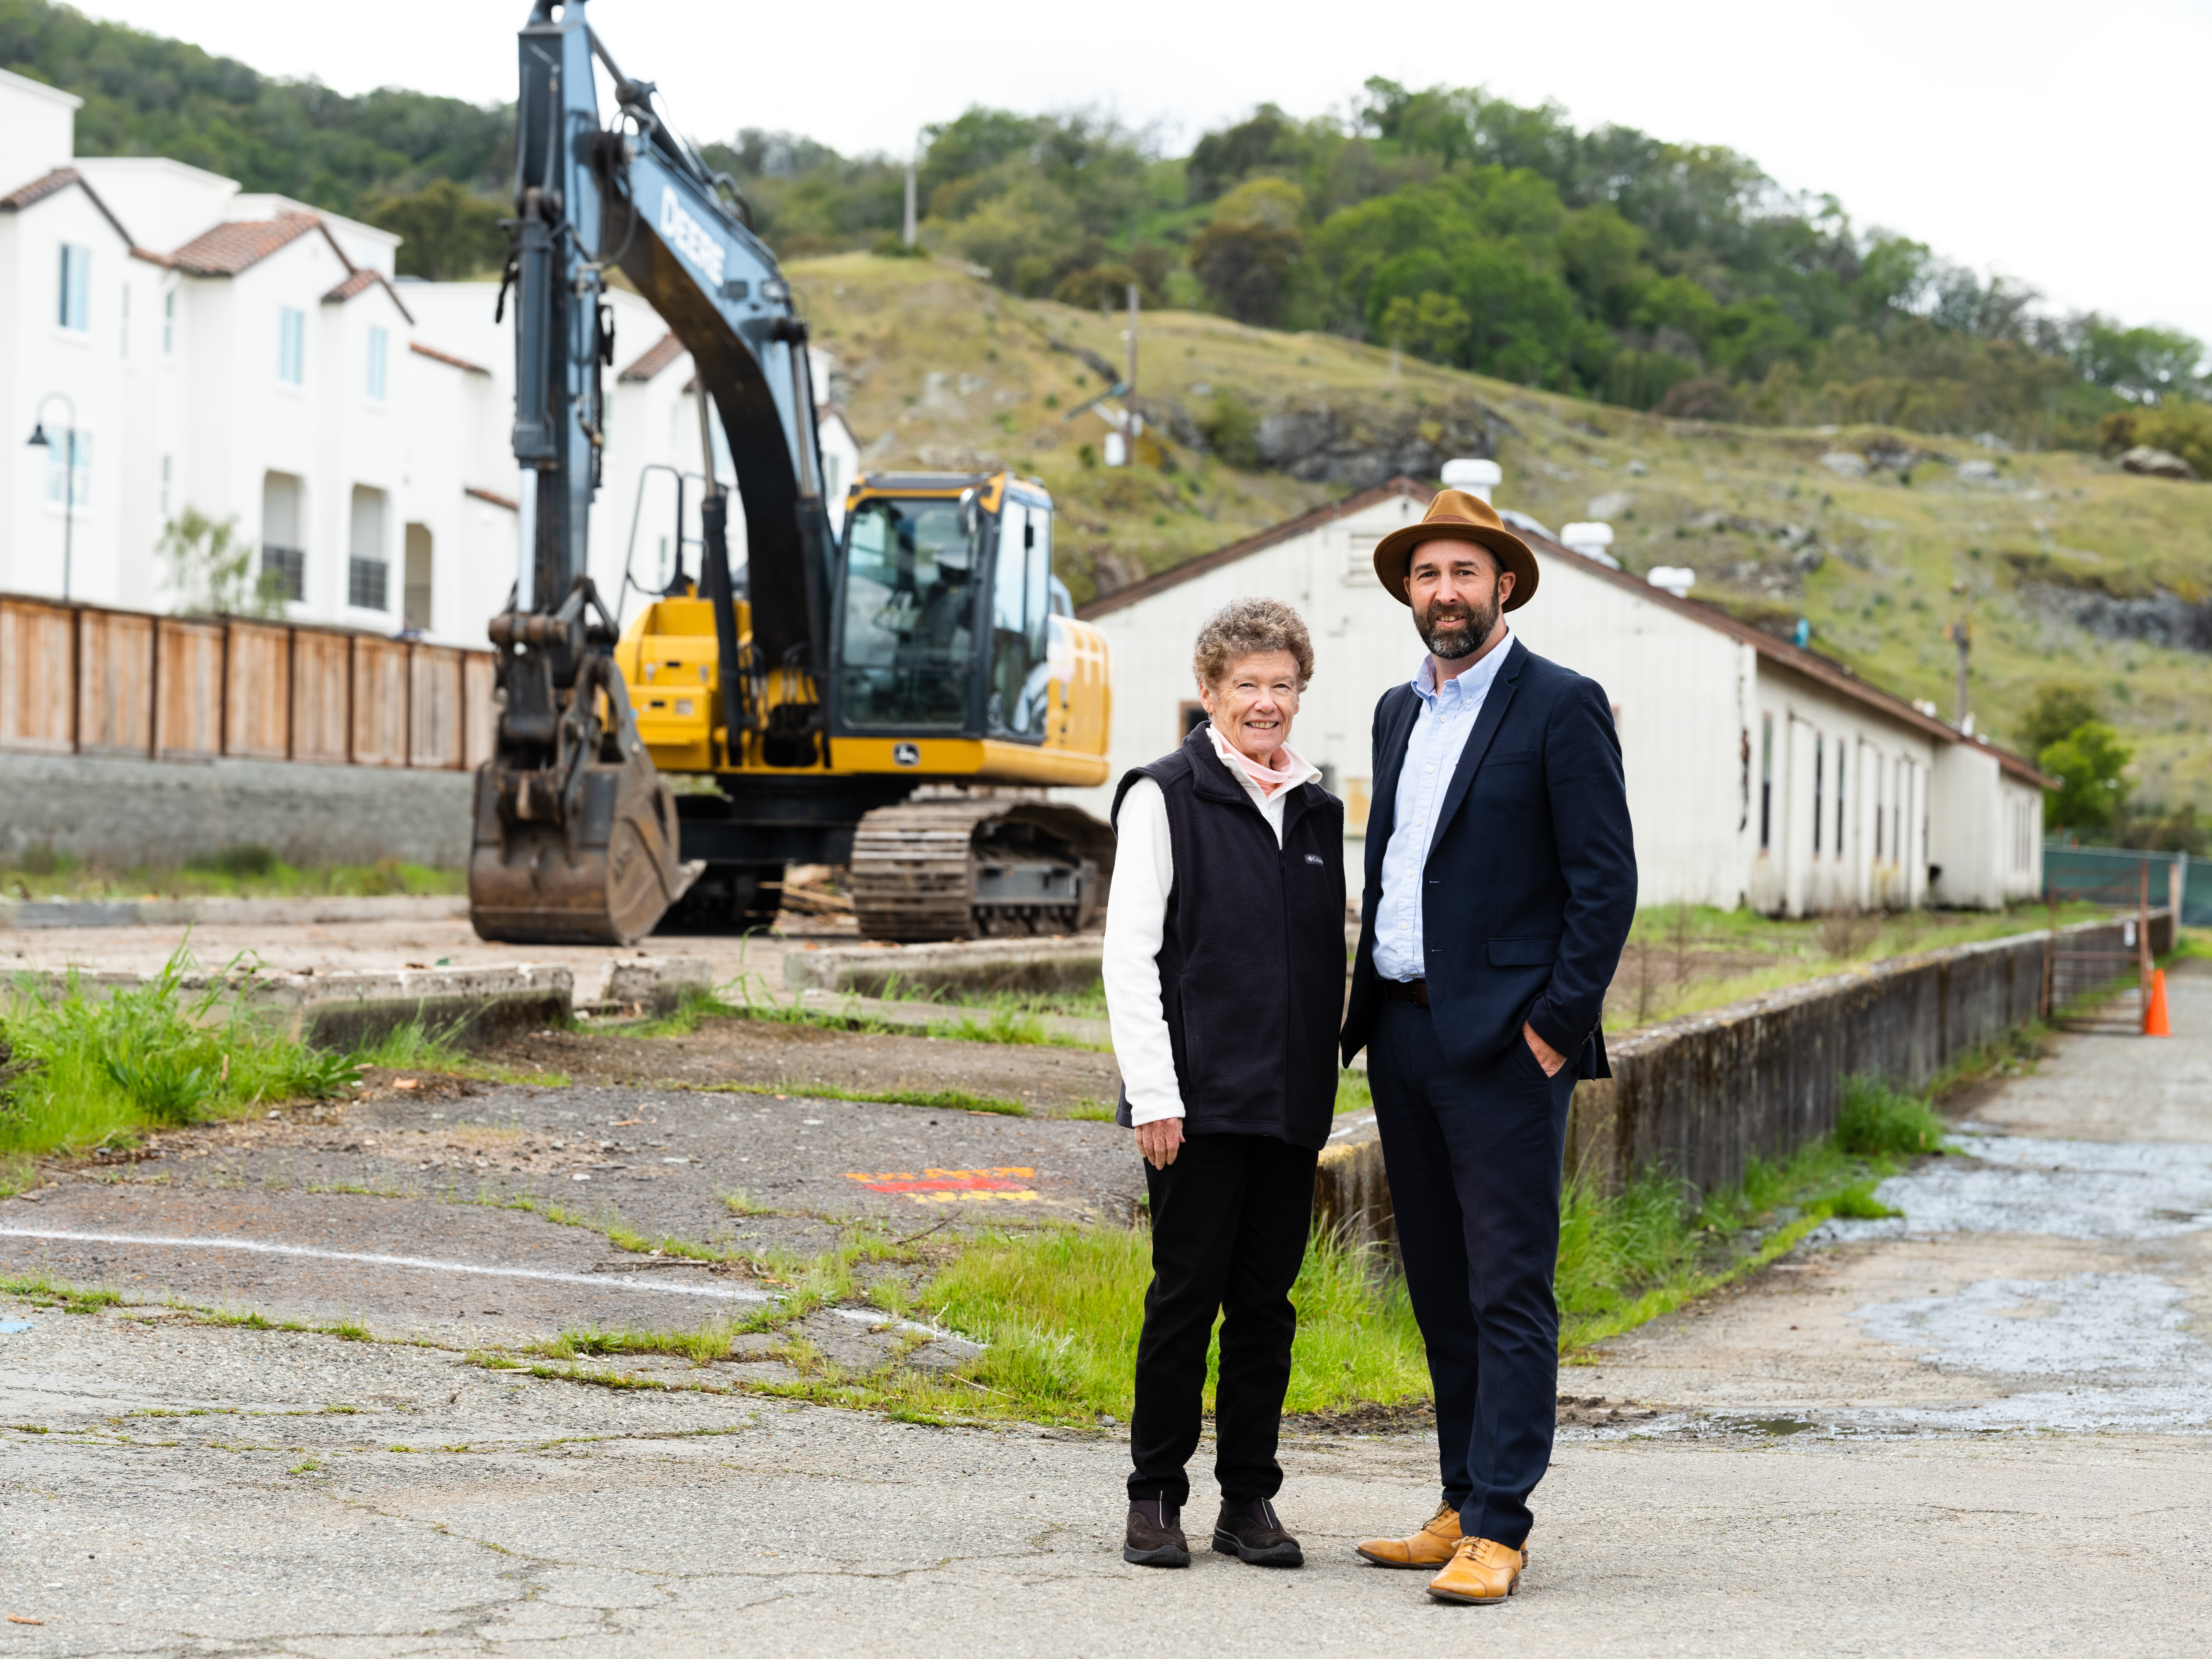 Mary Kay Sweeney and Paul Fordham stand in front of a construction site with a backhoe behind them